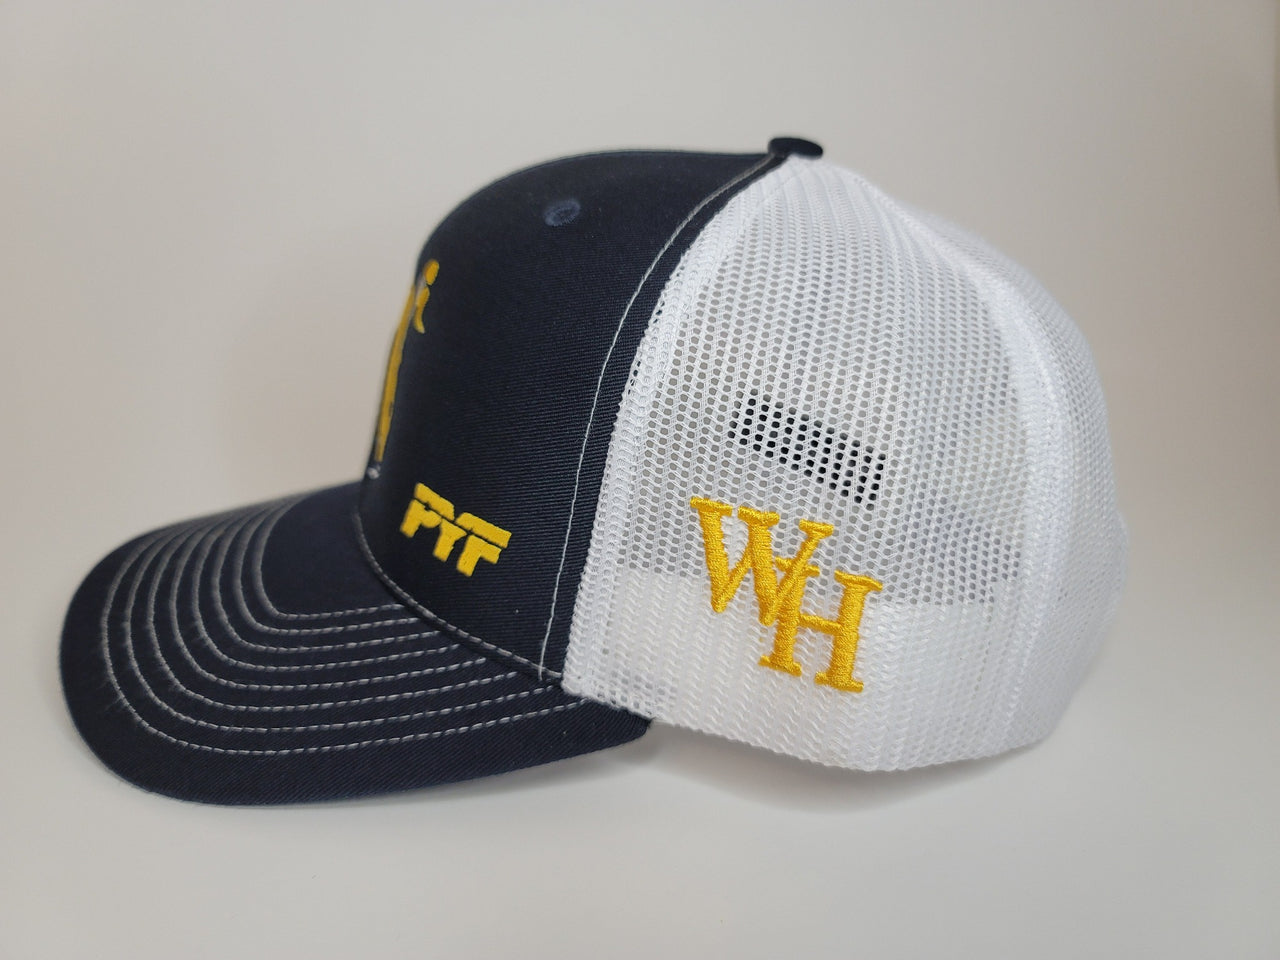 CXII Mesh Hat - Winter Haven, Florida (Gold State/Navy-White)